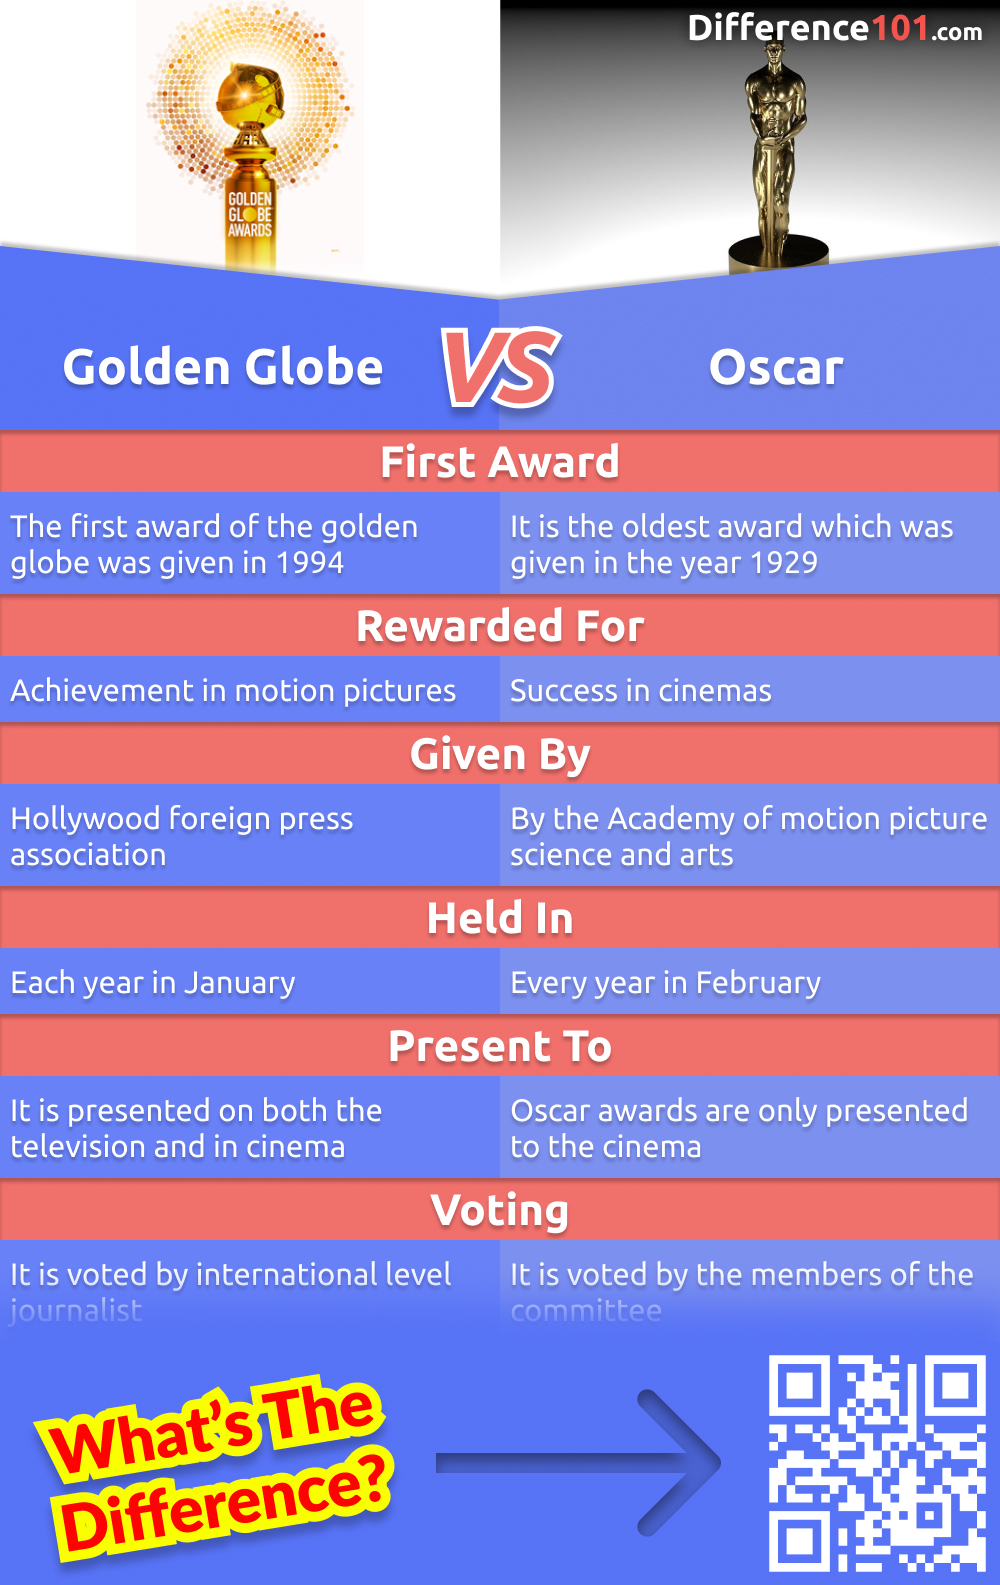 Oscar vs. Golden Globe vs. Emmy vs. Grammy awards - we look at the differences between the four awards shows and which ones are the most prestigious. Read more here.